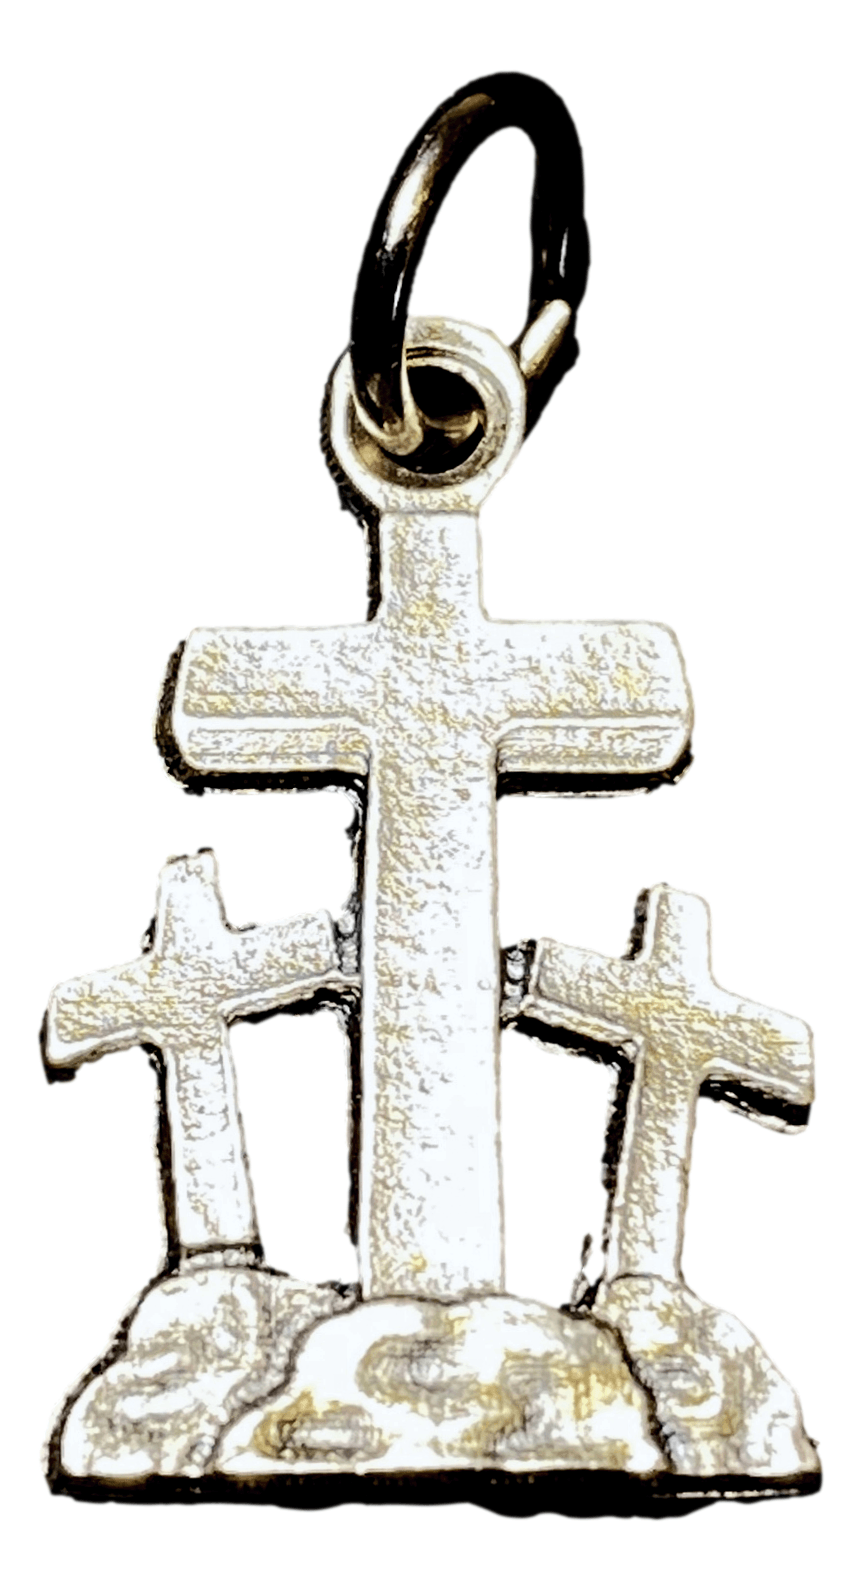 Charm Pendant Three Crosses on Cavalry Metal Alloy 0.5 W x 1 H Inches - Ysleta Mission Gift Shop- VOTED El Paso's Best Gift Shop